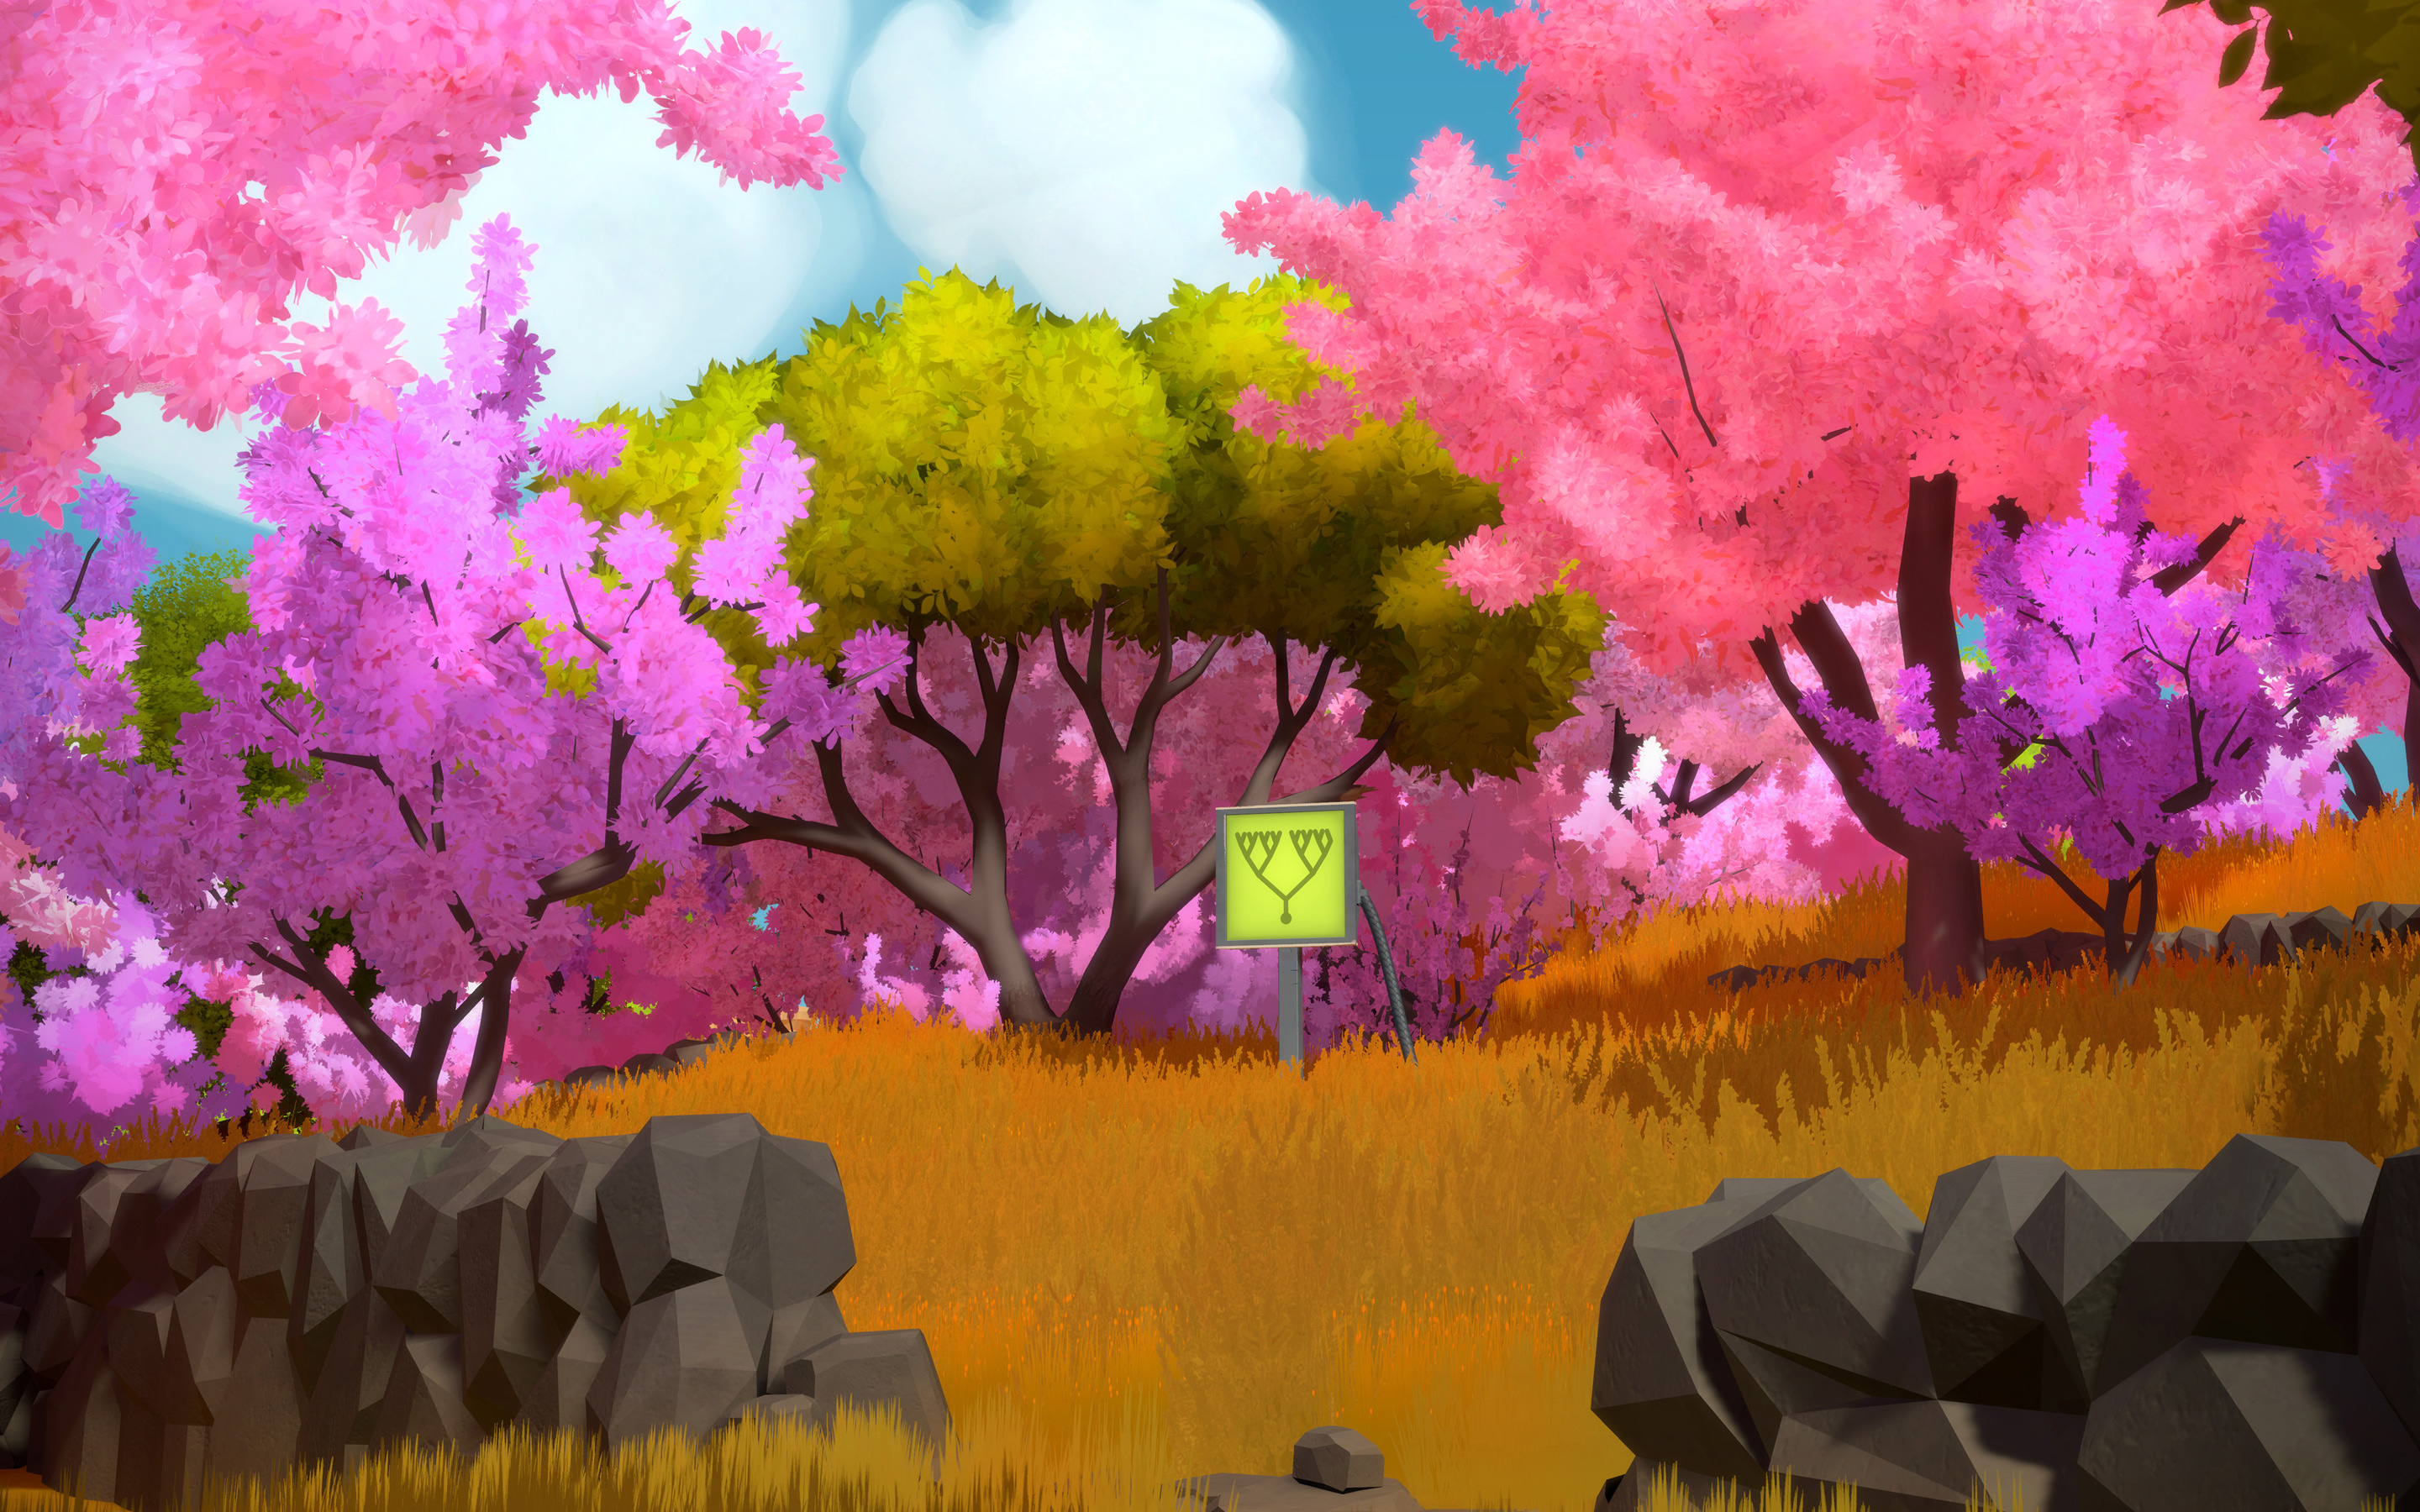 Puzzle game, Mind-bending challenges, The Witness wallpaper, Gaming experience, 2880x1800 HD Desktop